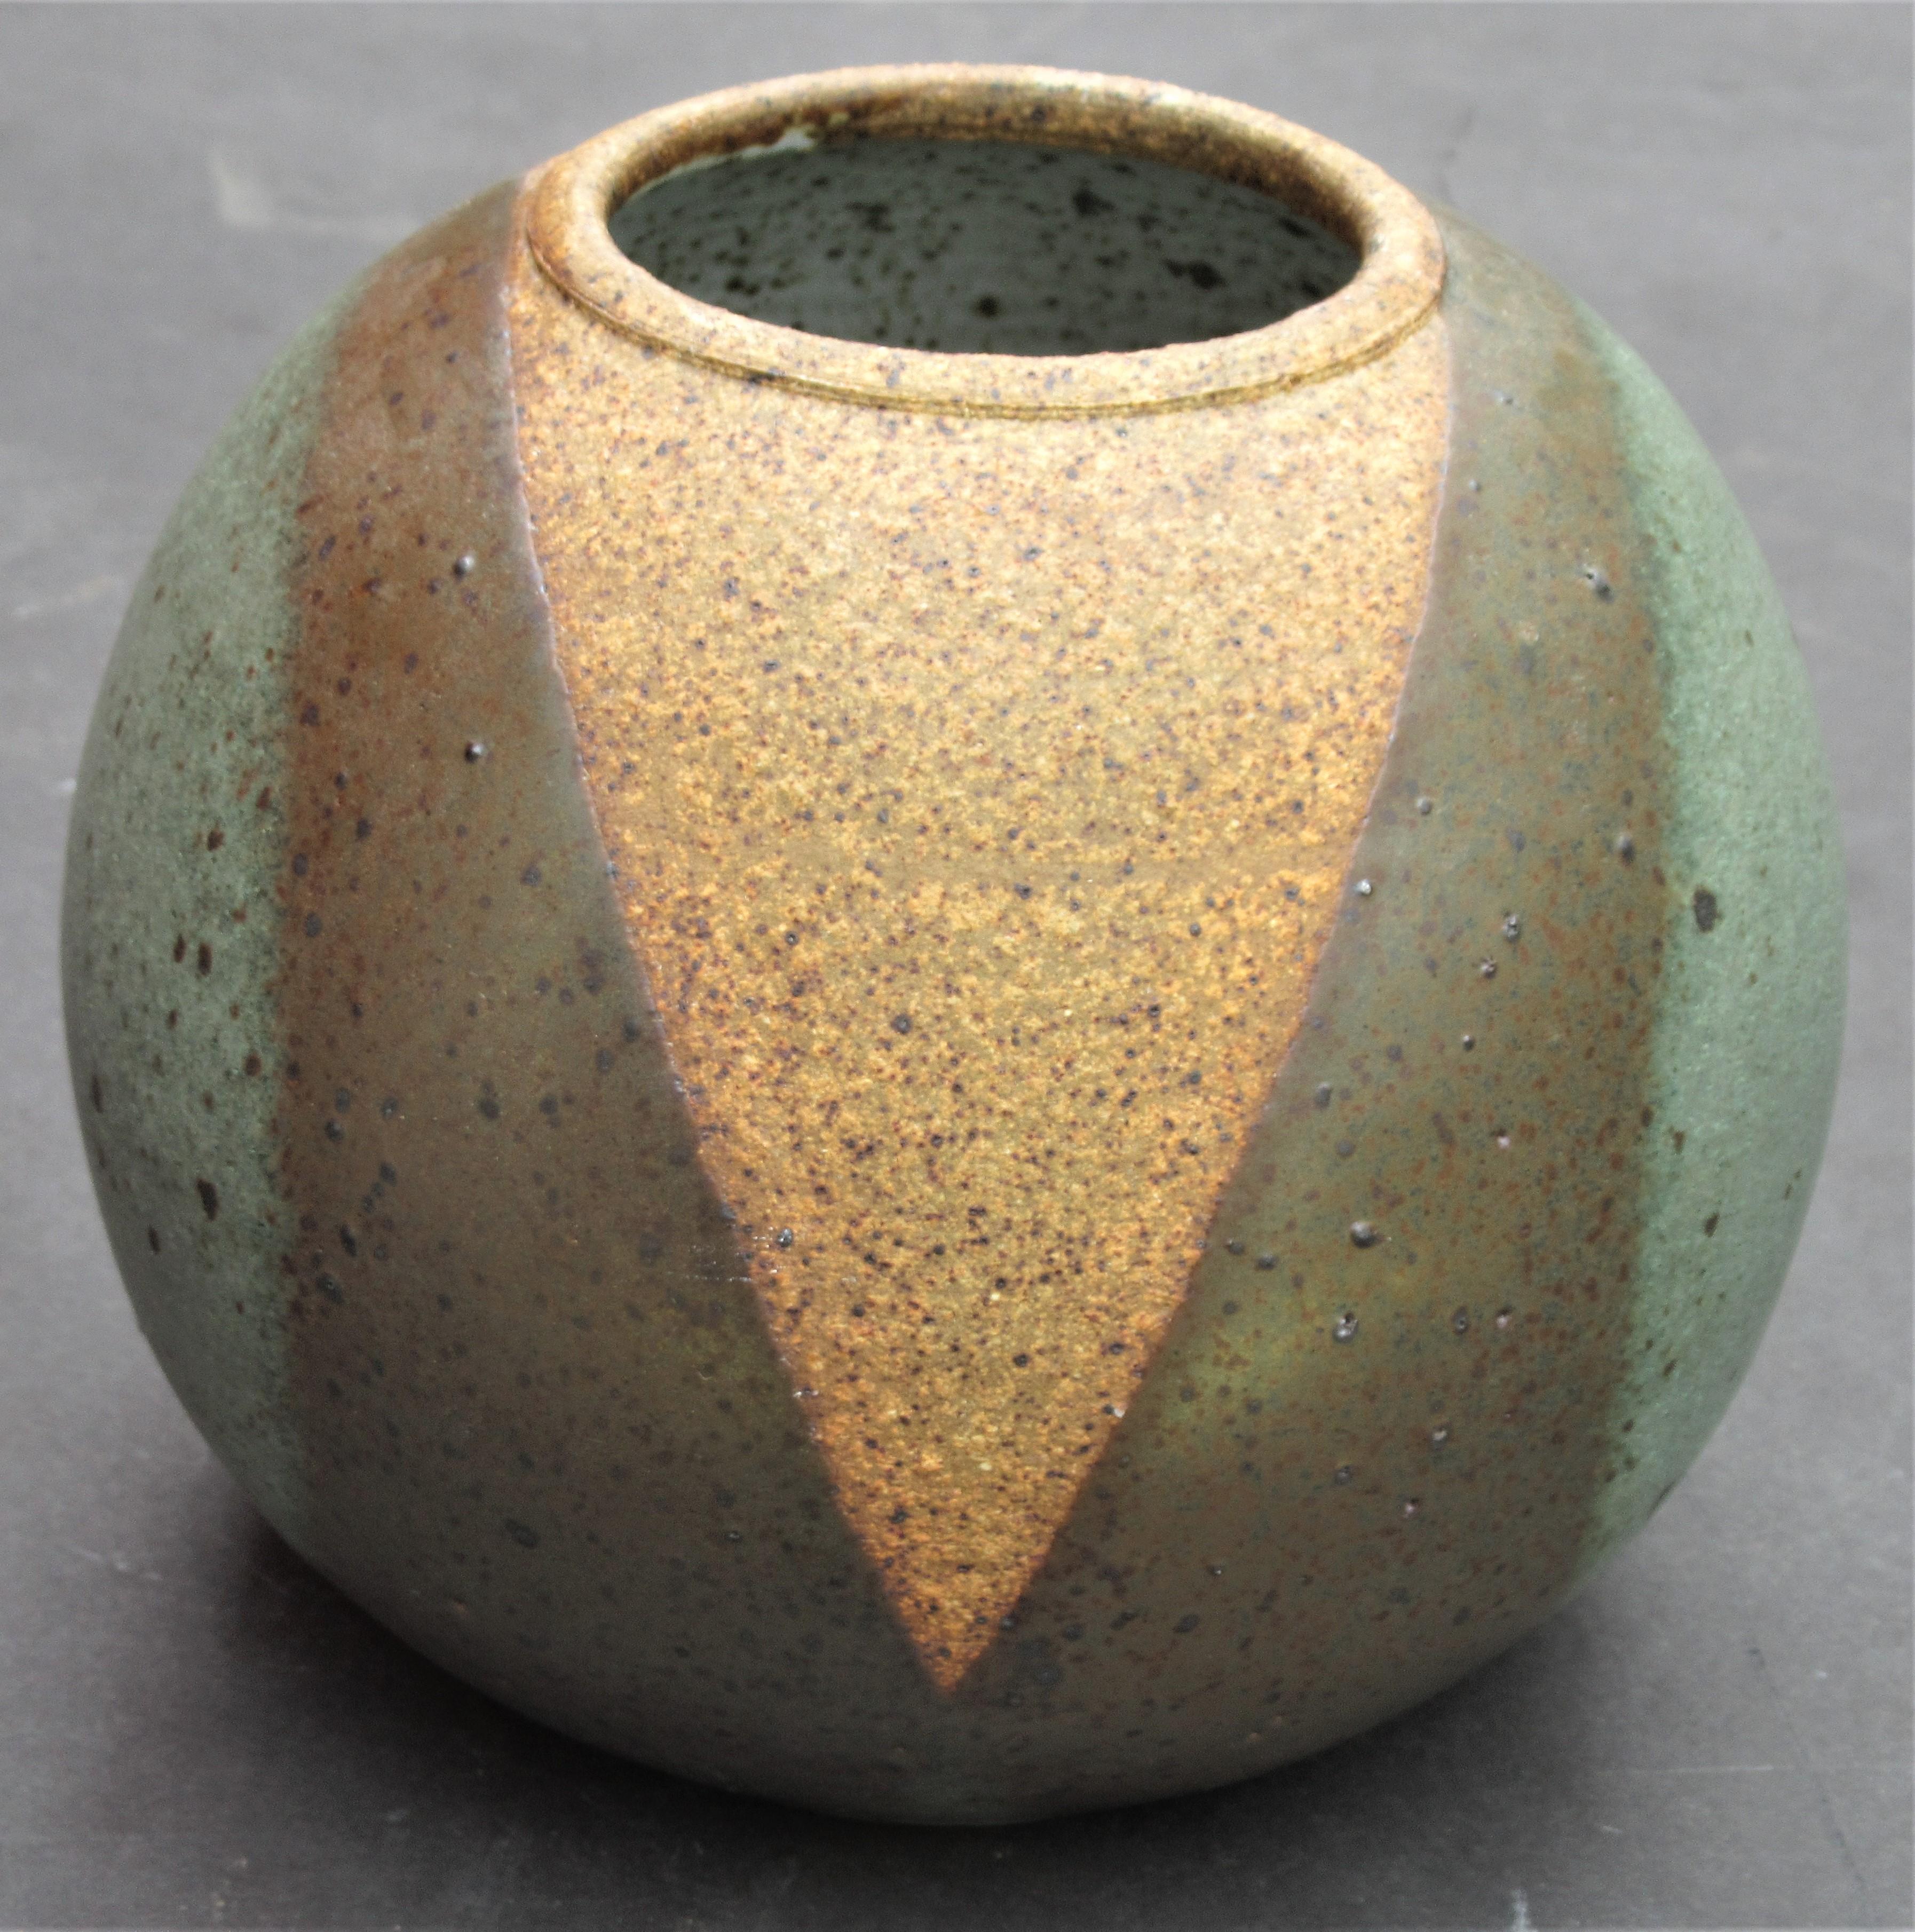 A very fine spherical form multi - glazed stoneware vase by the highly acclaimed American studio ceramic artist and one of the most respected and influential ceramic teachers (Alfred University) of the 20th century - Val Cushing (1931-2013) - signed